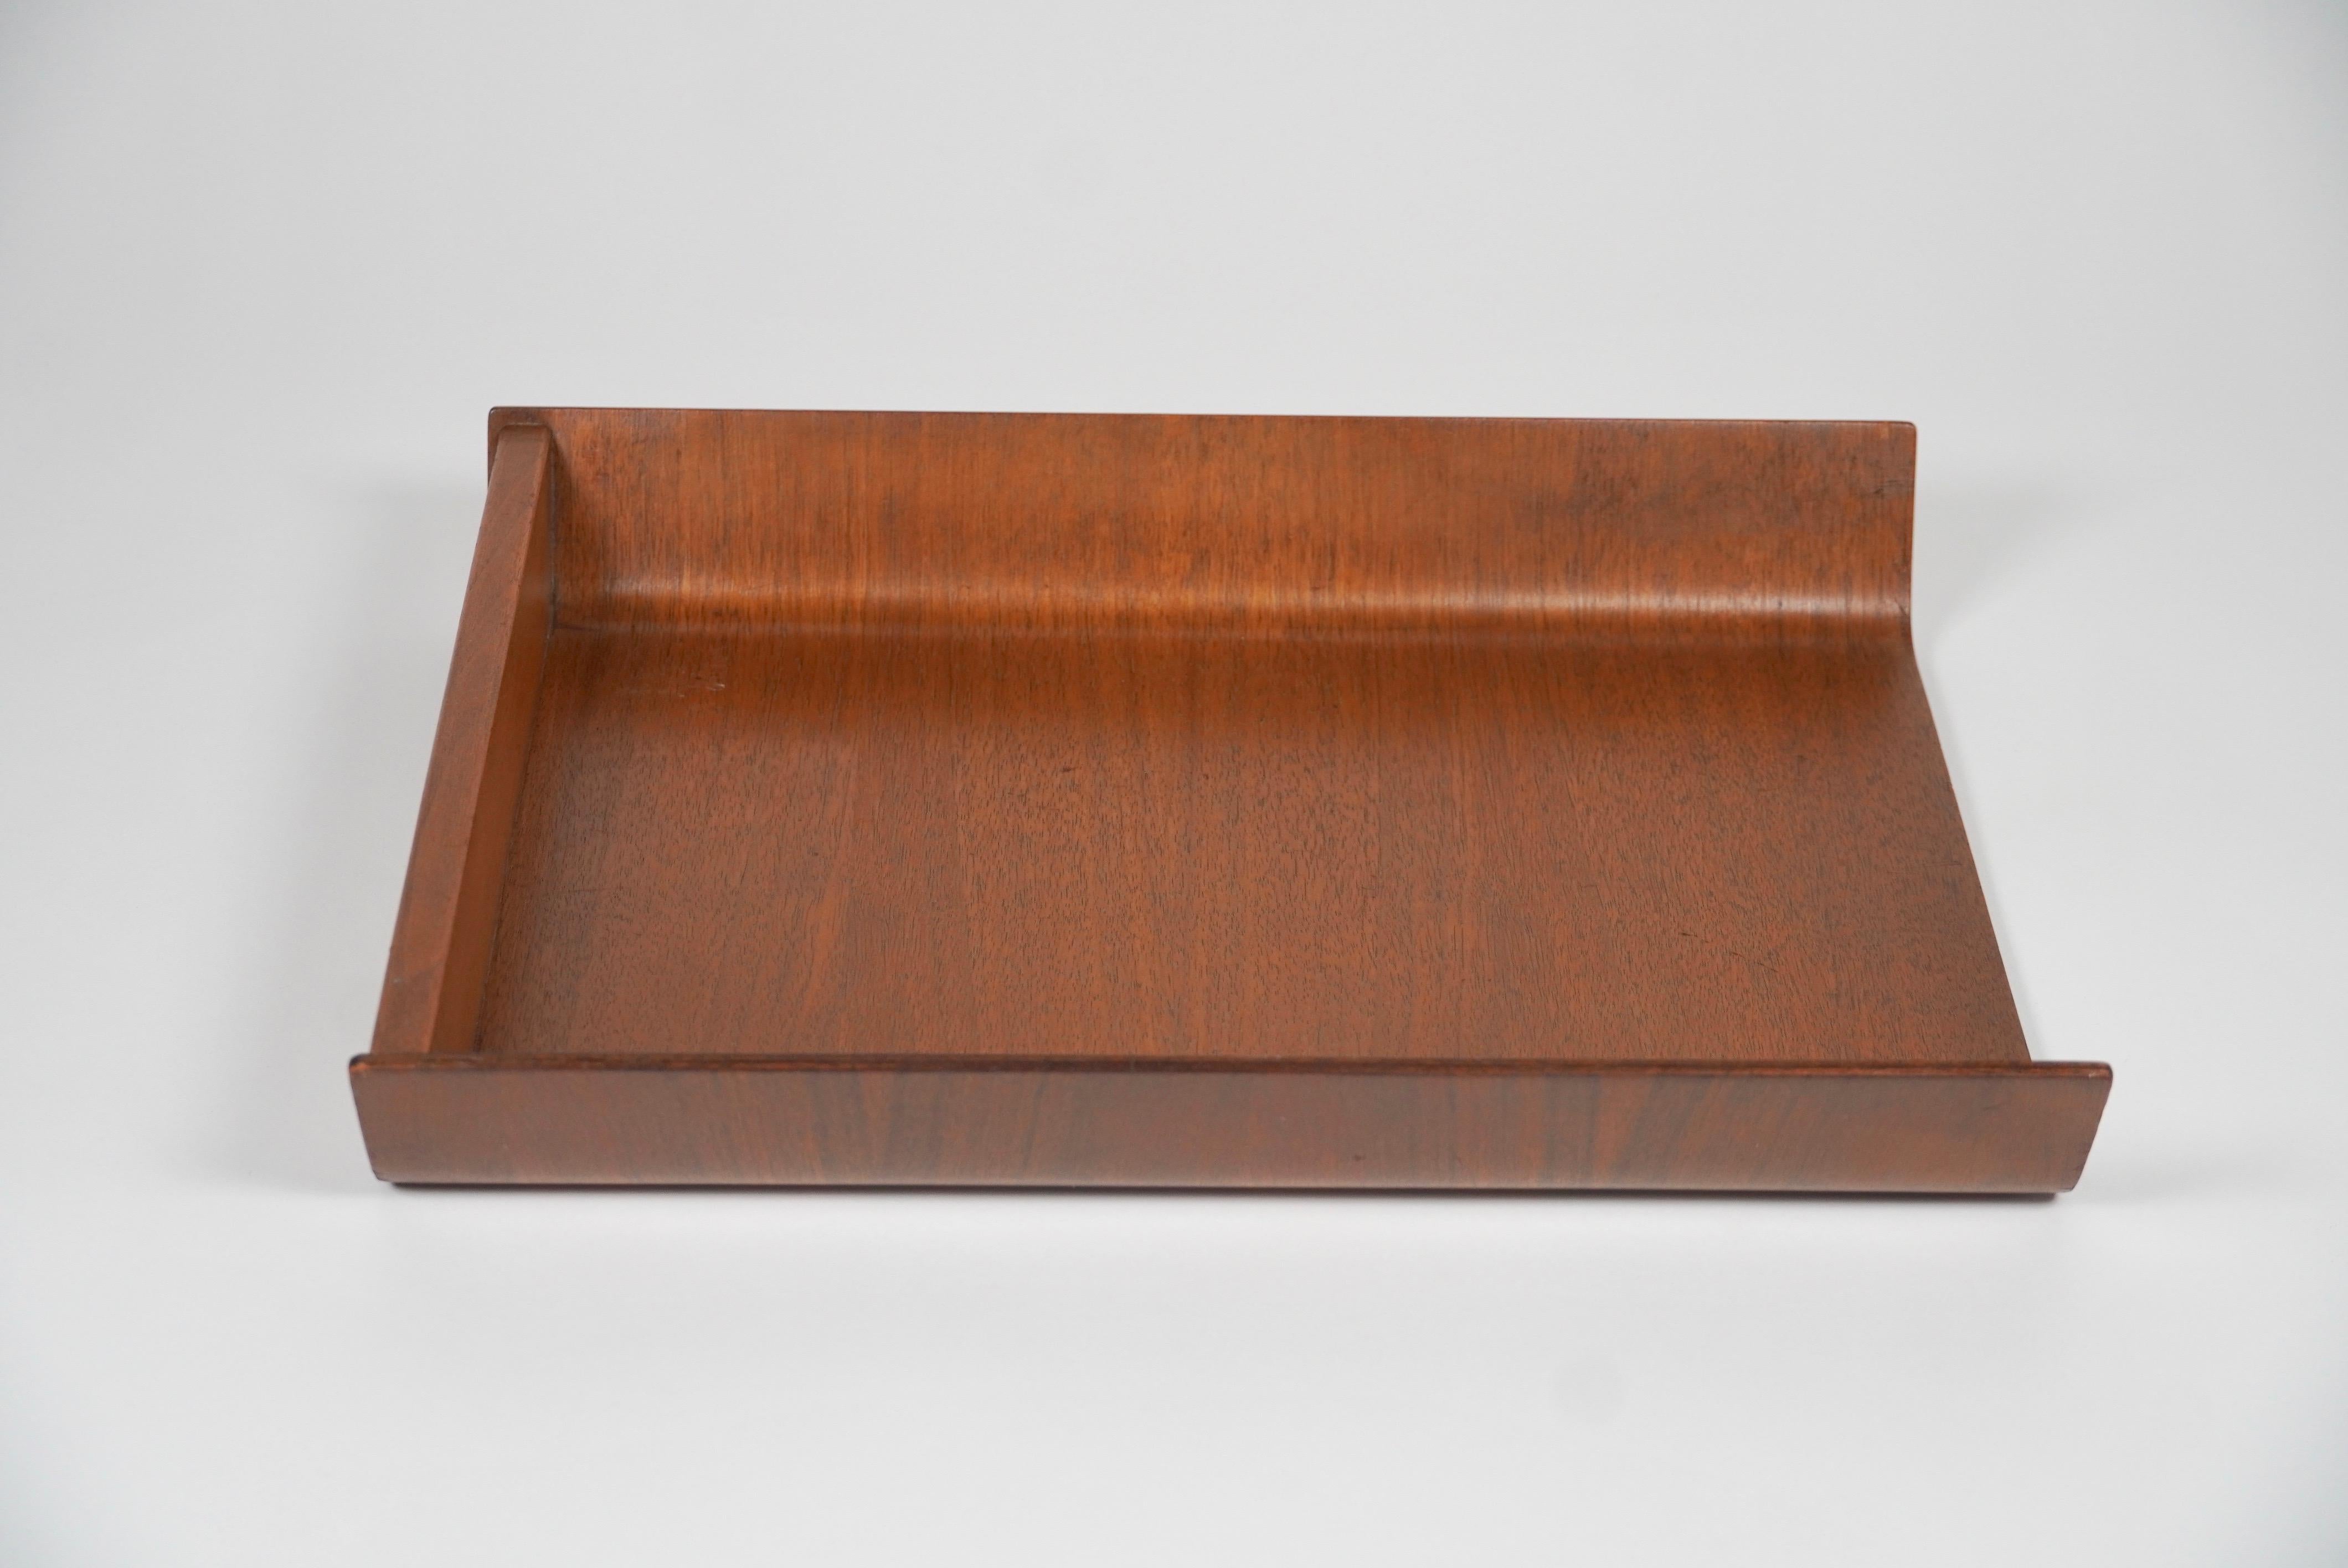 Designed by Florence Knoll in 1948, this letter tray is made of walnut molded plywood and was a staple of midcentury office decor. The underside bears Knoll Associates label, pre 1969 with the 320 Park Avenue address, indicating manufacture in the